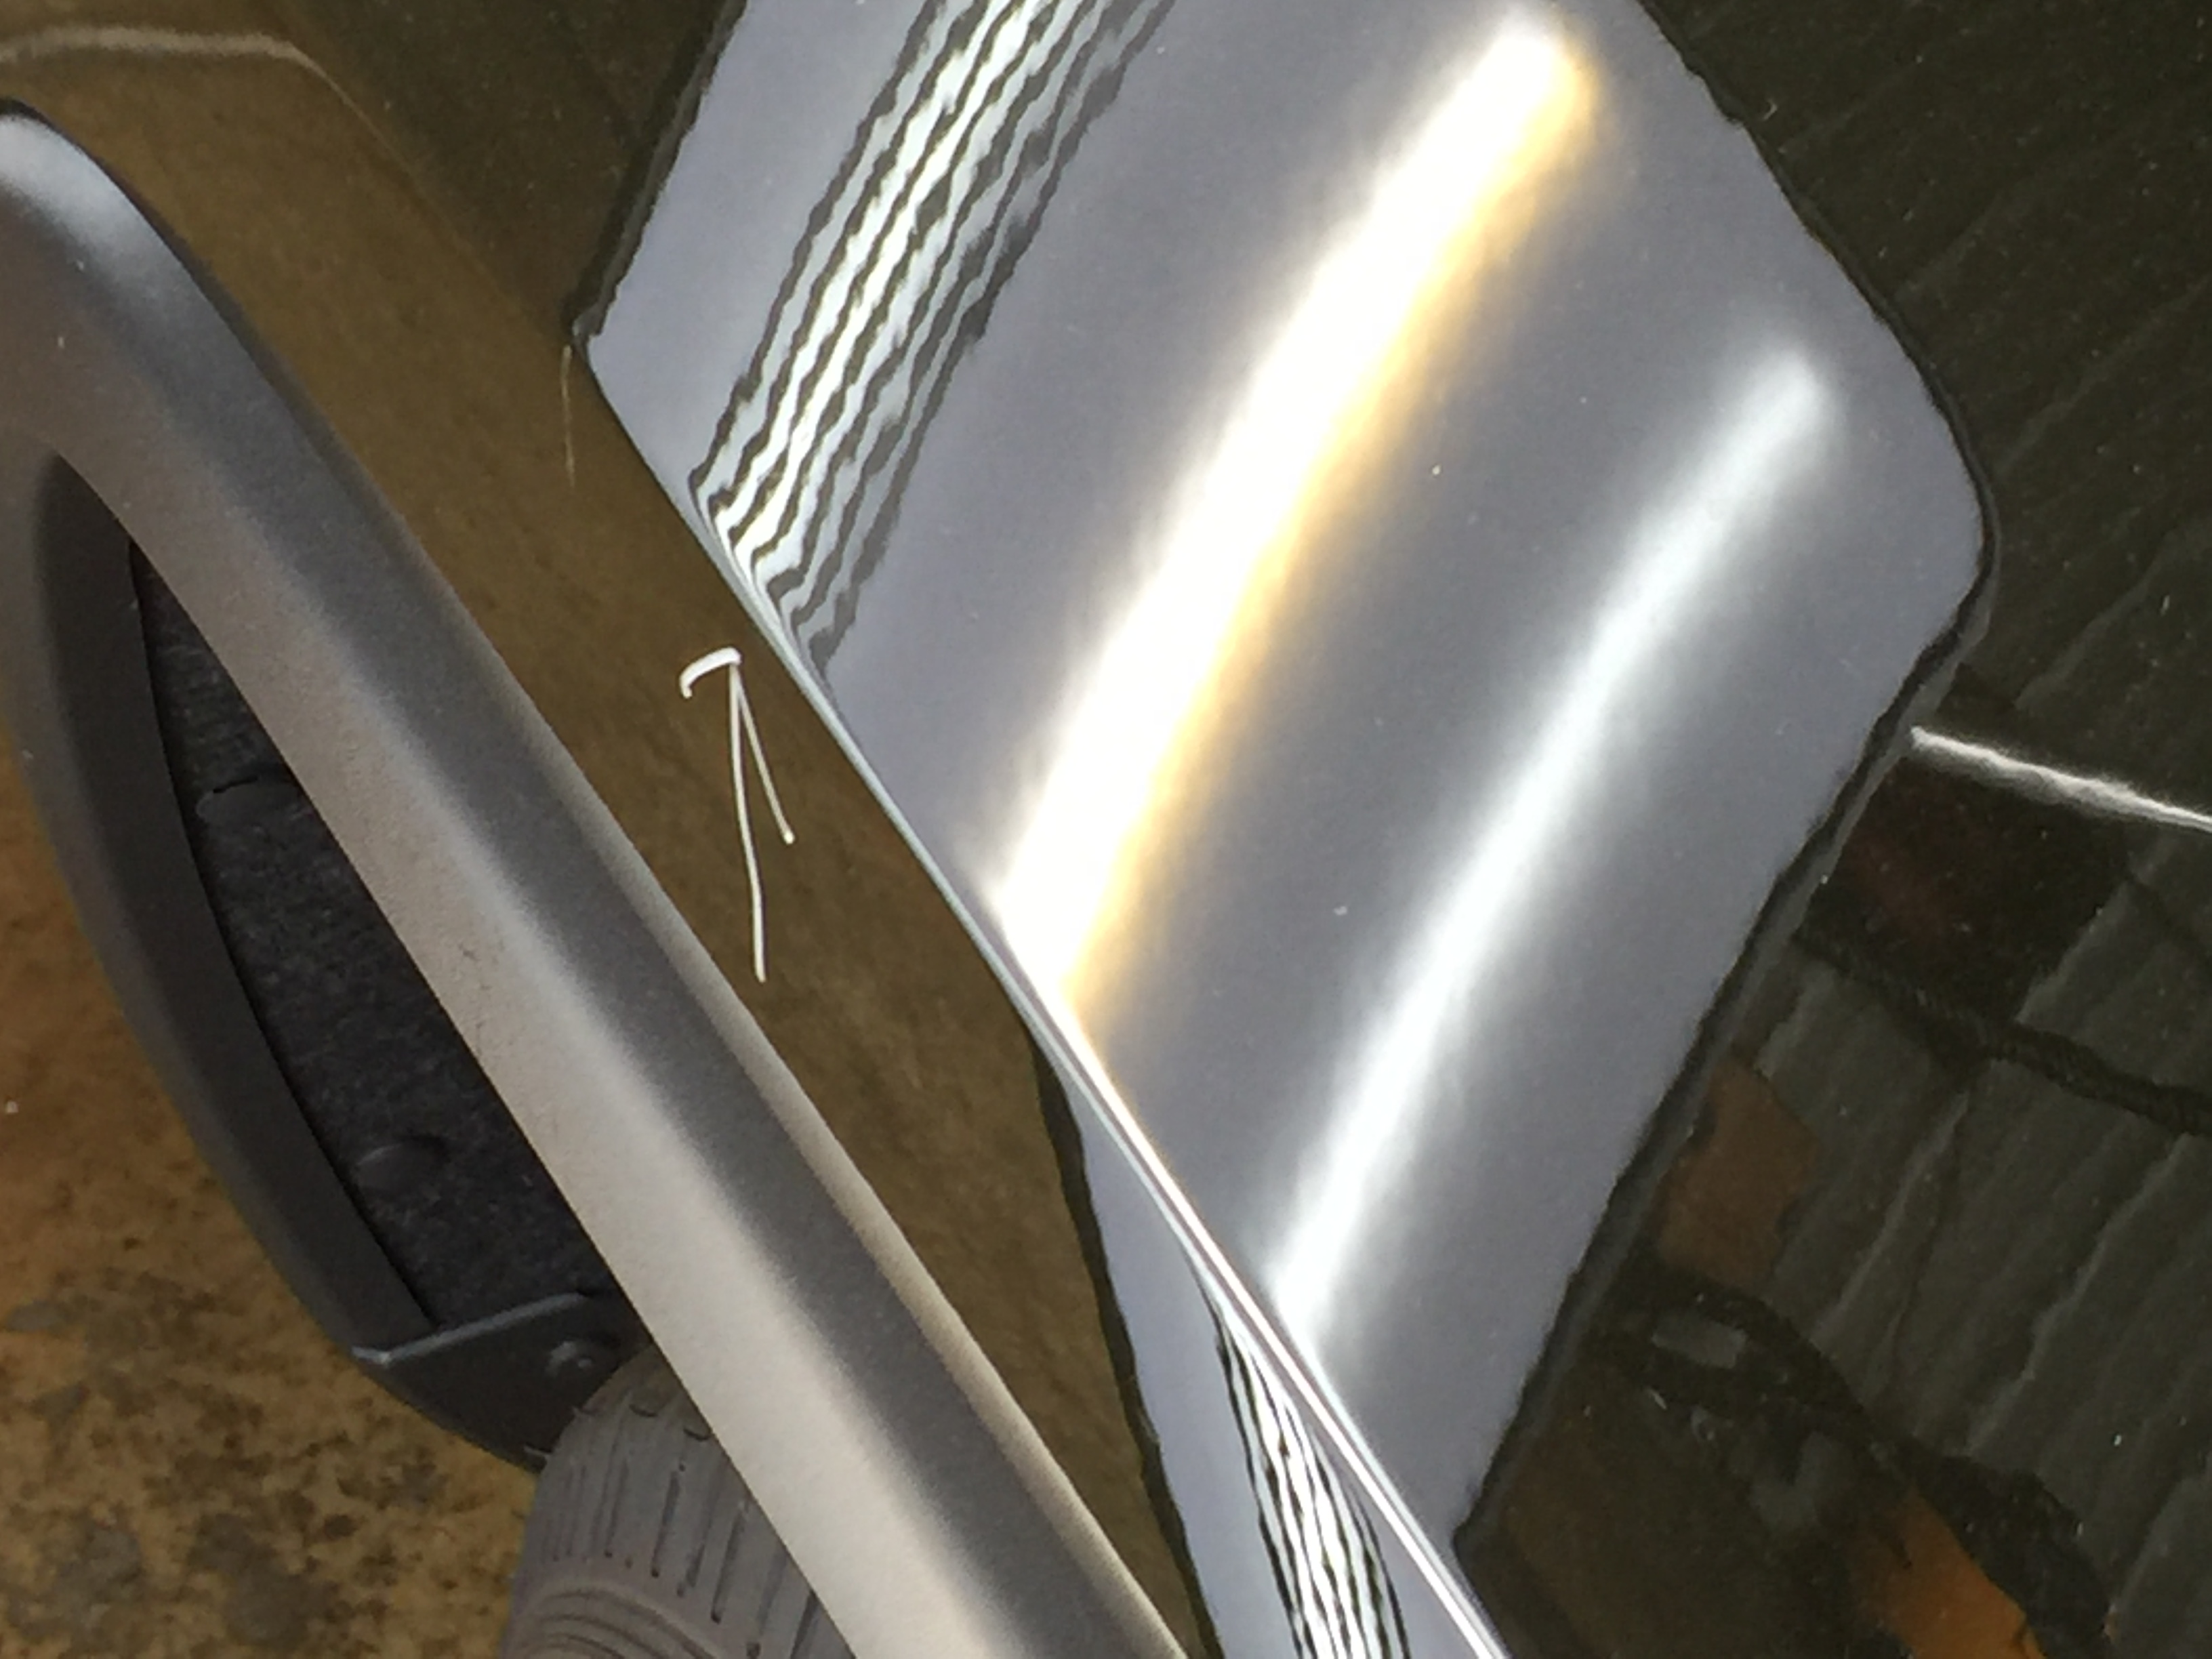 2016 Jeep Grand Cherokee Fender Dent Removed with Paintless Dent Removal, Springfield, IL, http://217dent.com